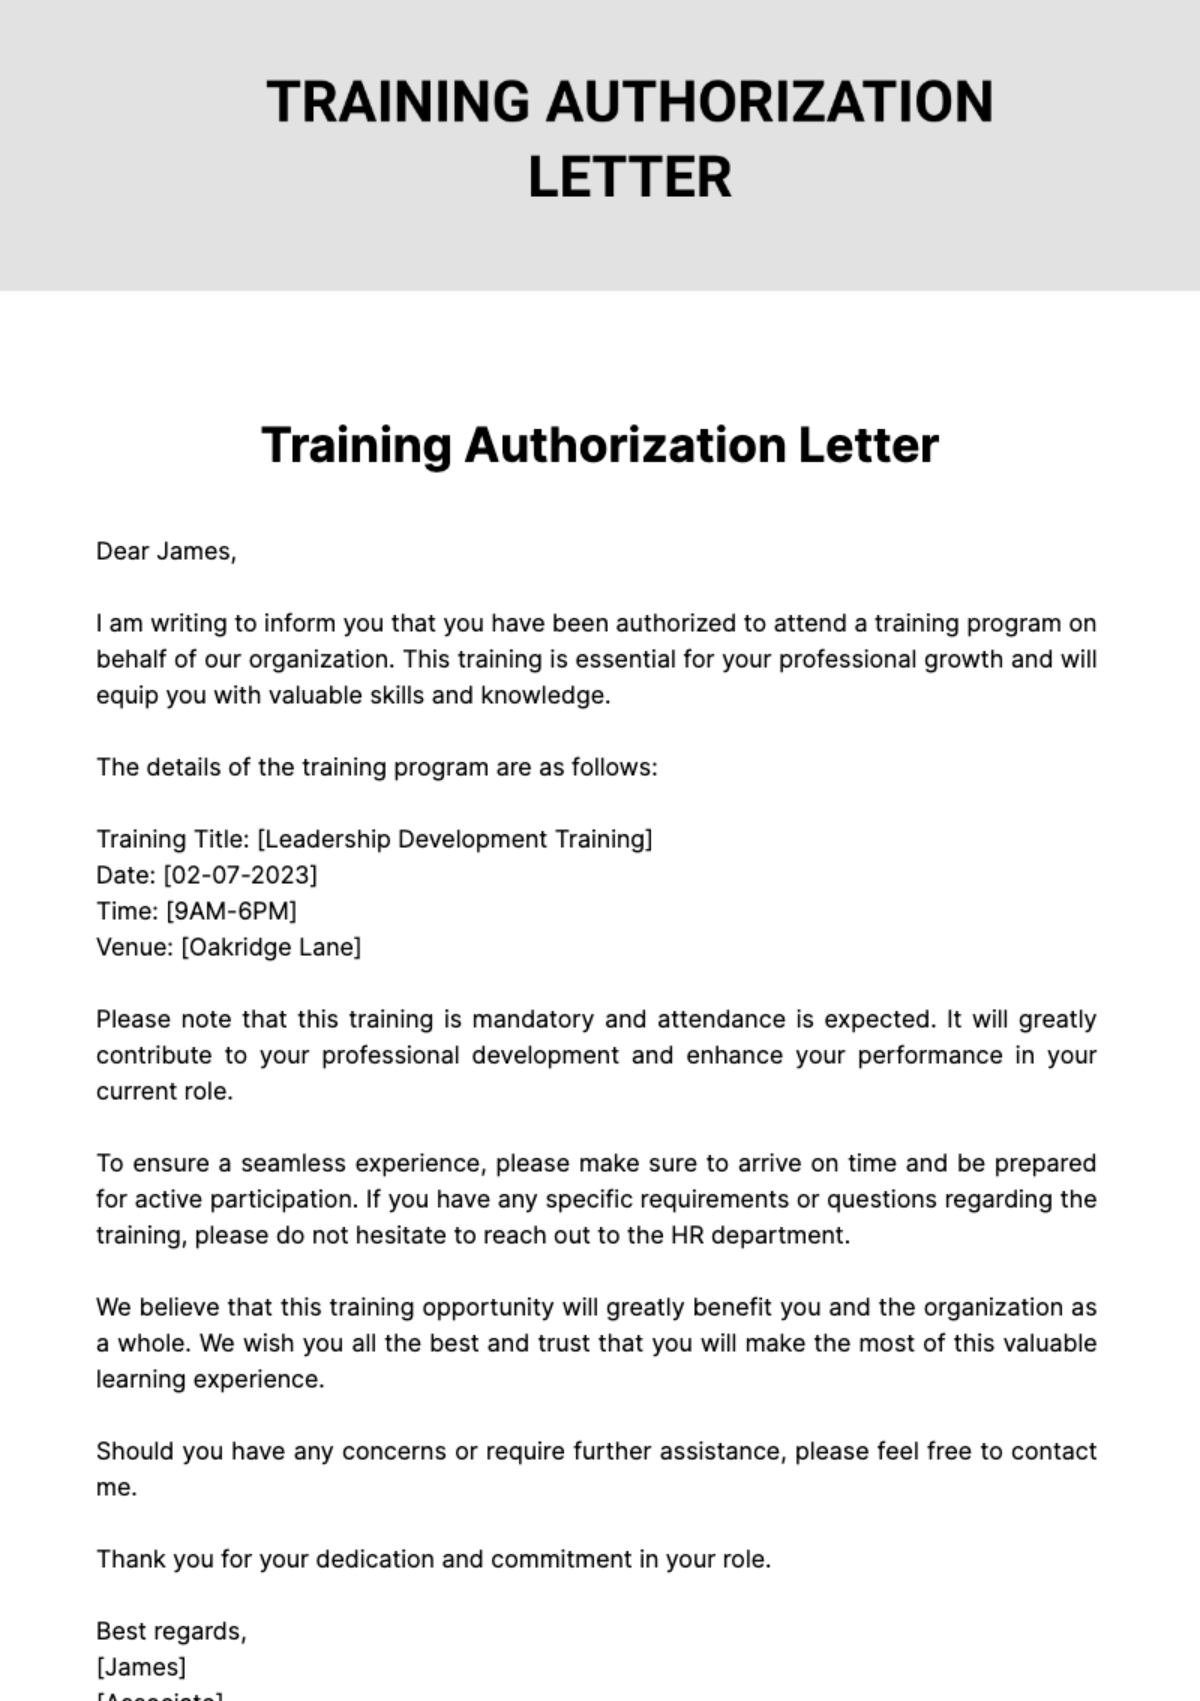 Free Training Authorization Letter Template